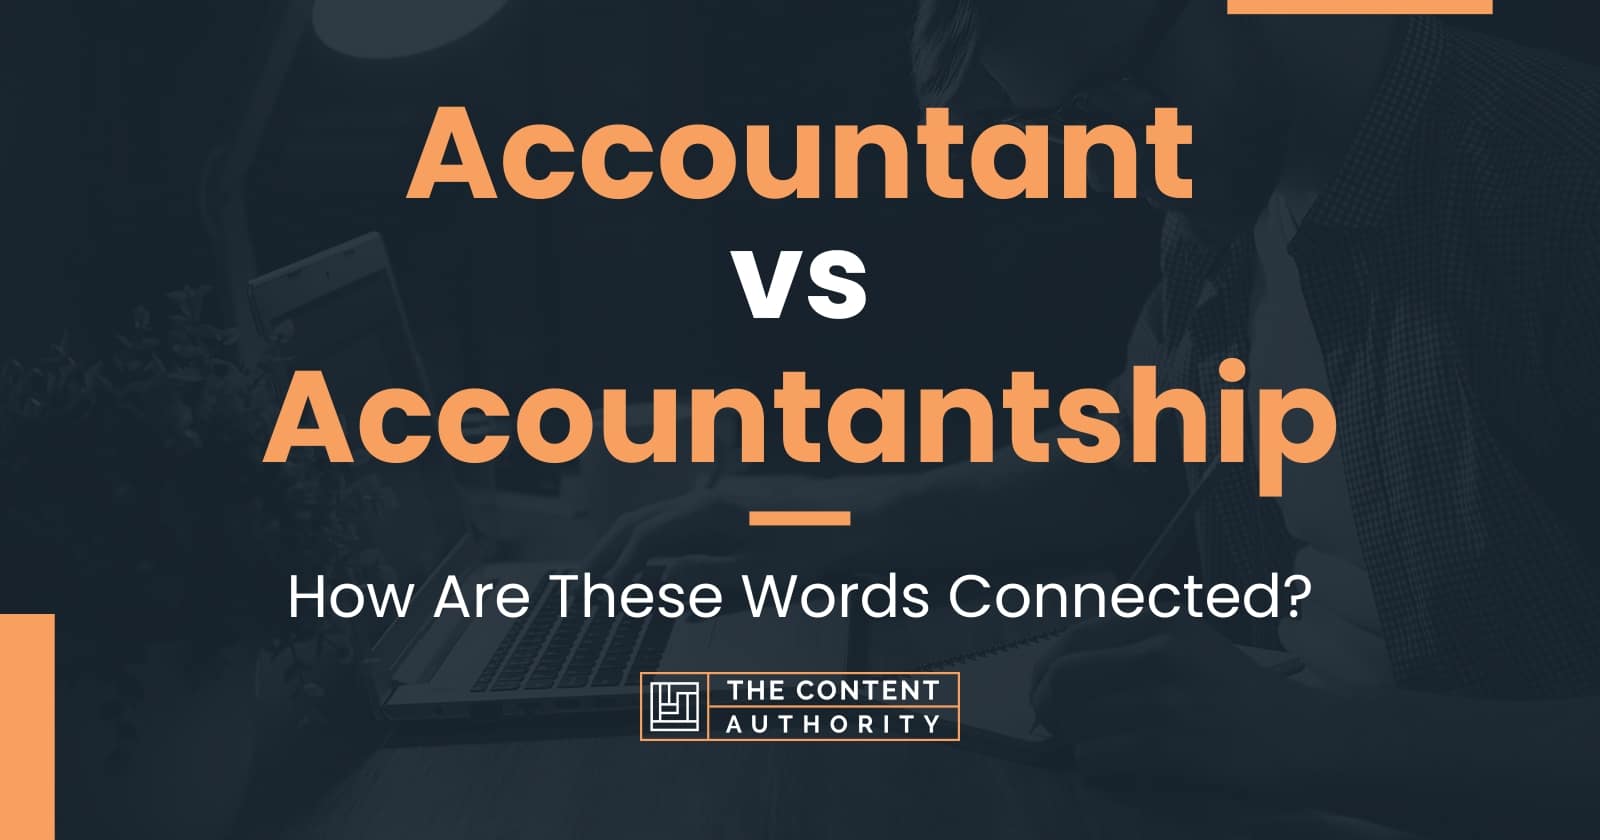 Accountant vs Accountantship: How Are These Words Connected?